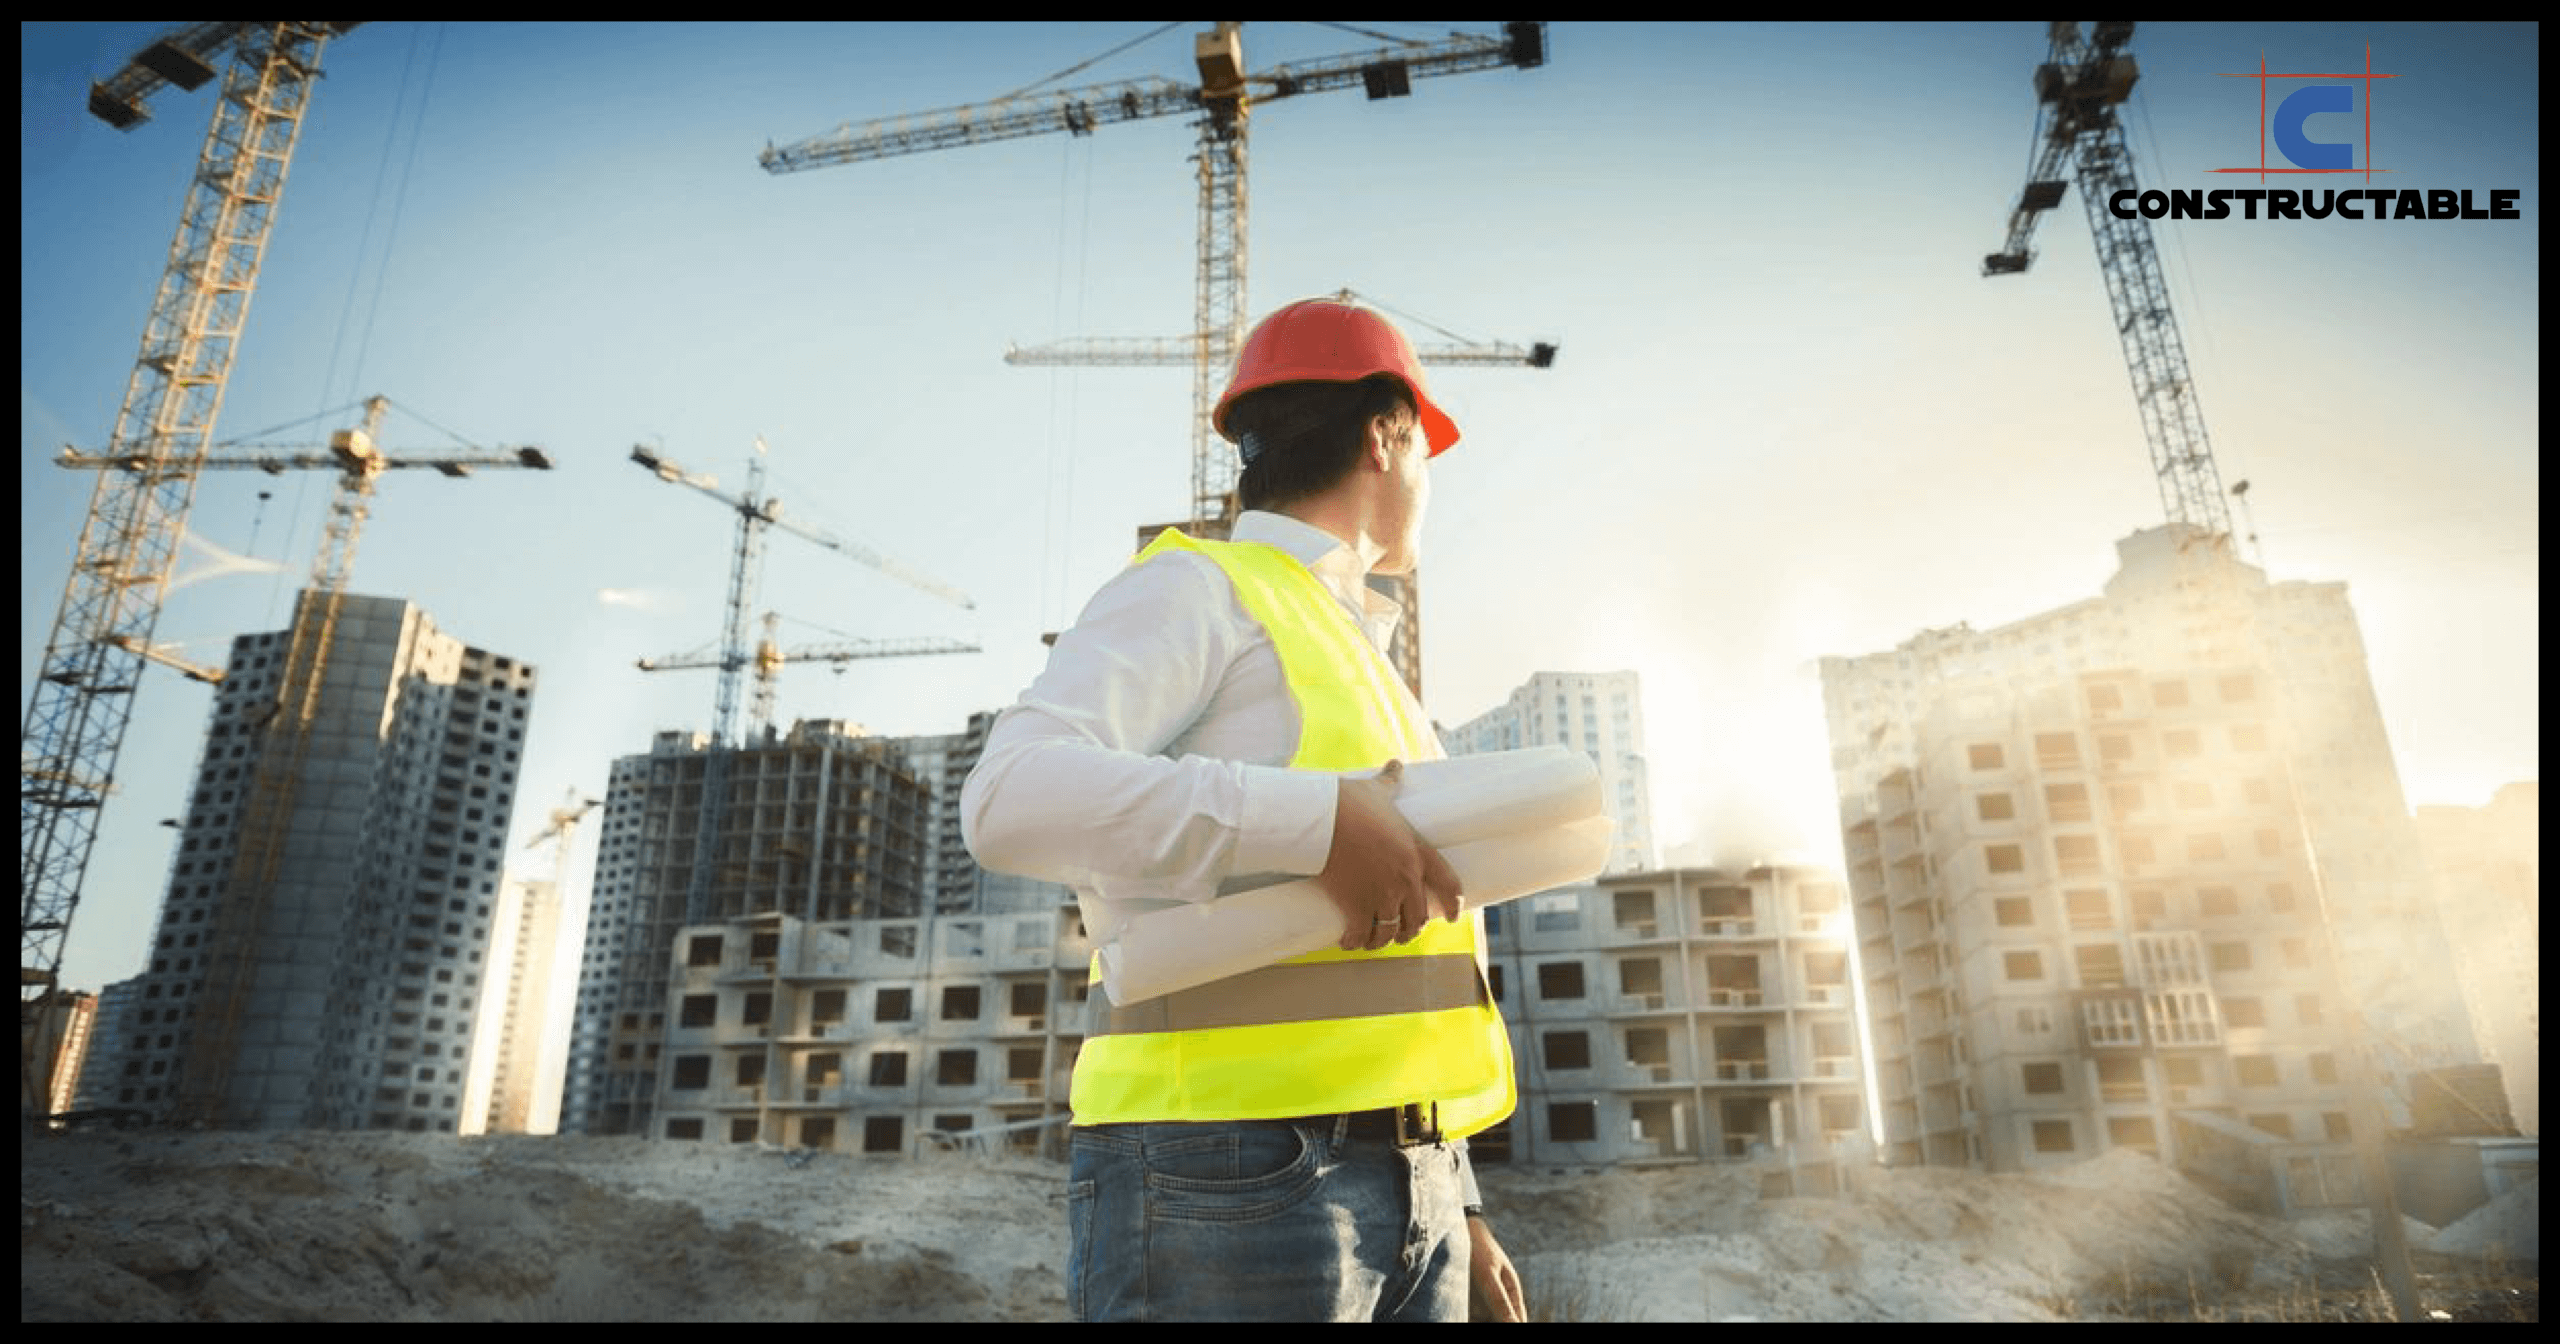 A construction worker in a red hard hat and reflective vest holds blueprints, looking at construction cranes and buildings against a sunny sky, contemplating the escalating construction costs.